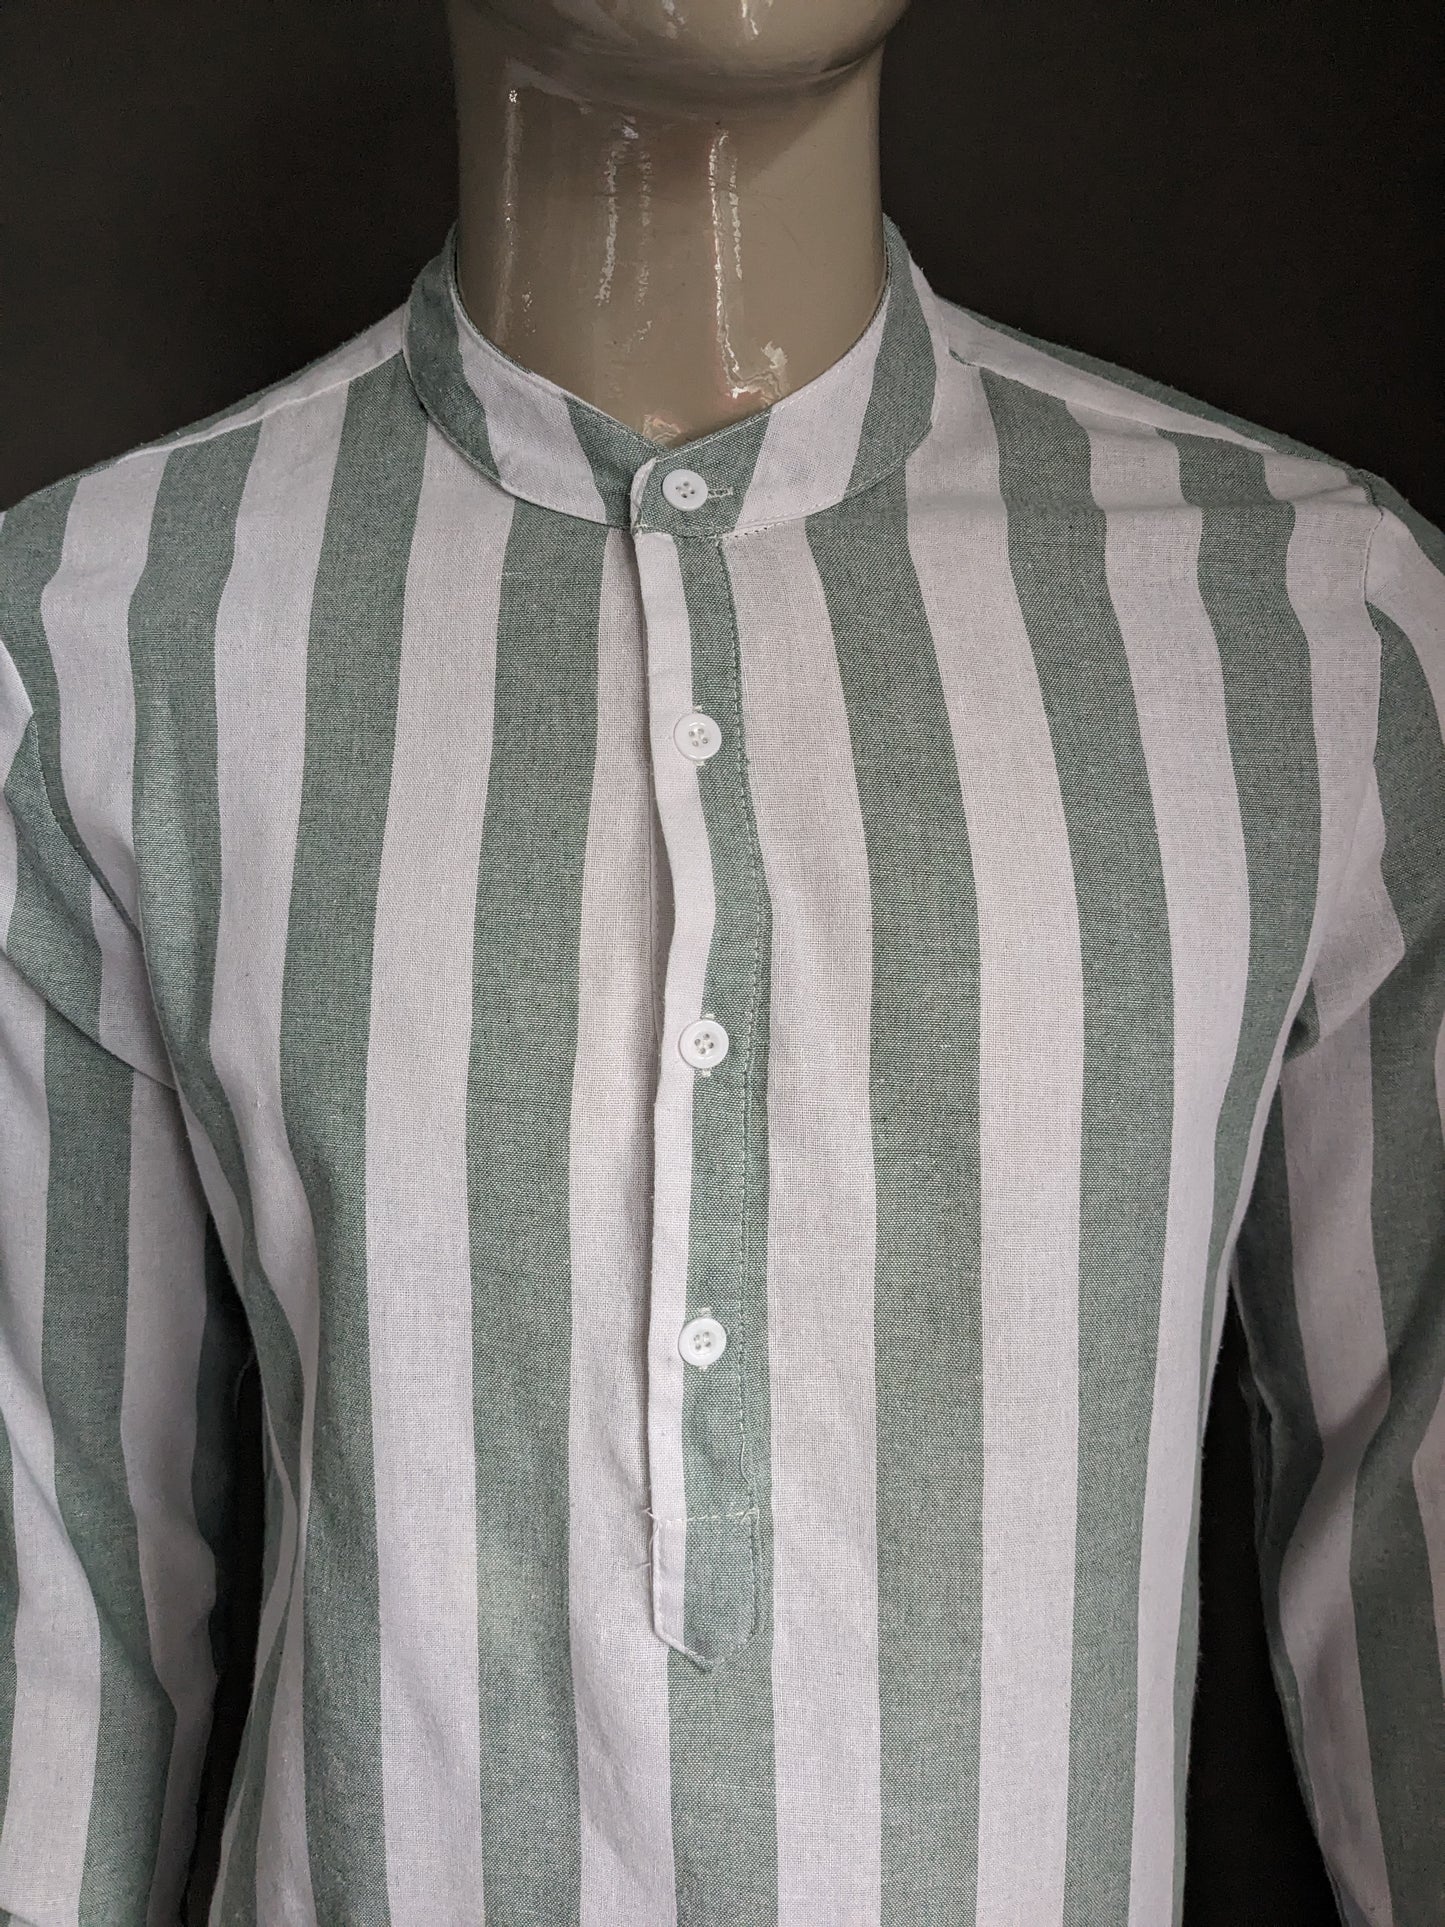 Brandless shirt shirt with farmers / raised / mao collar. Green white striped. Size M / L.